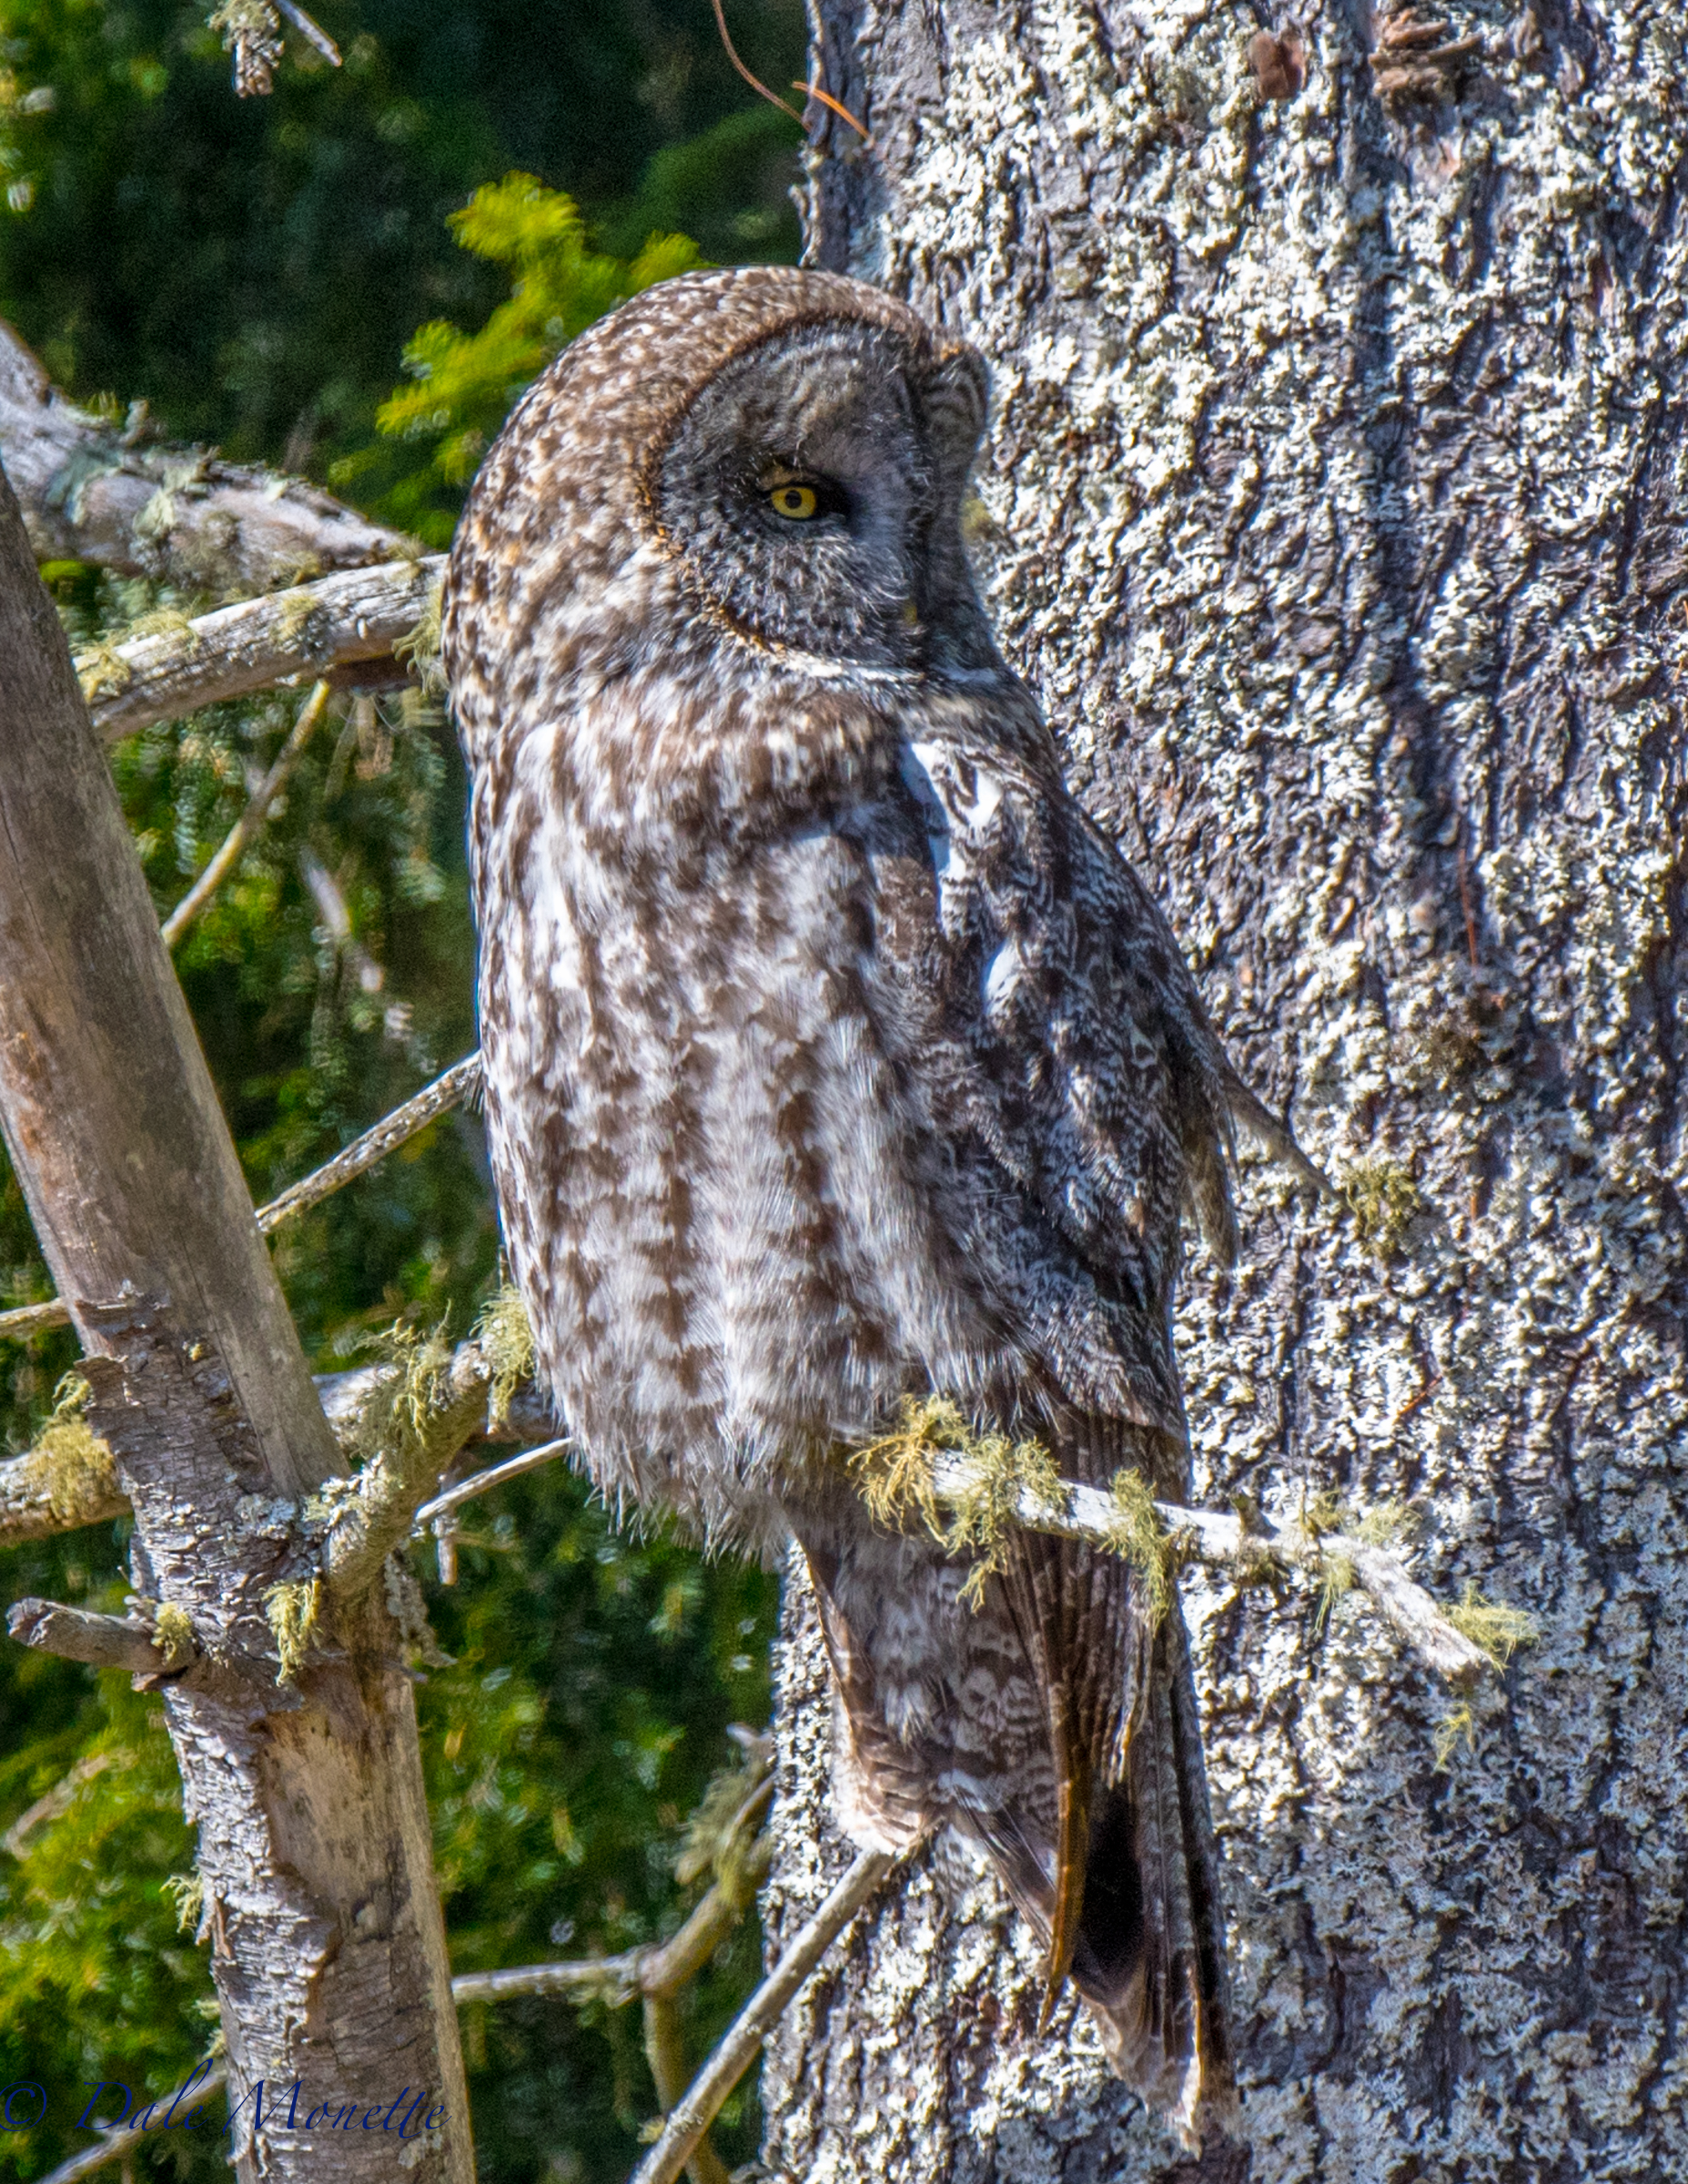   I took a ride north today to see if the great gray owl was still hanging in there. &nbsp;It is ! &nbsp;It's always fun to see it but today it was 25 feet up in a pine tree, 1/2 mile north of where he has been hanging out. &nbsp;3/13/17  